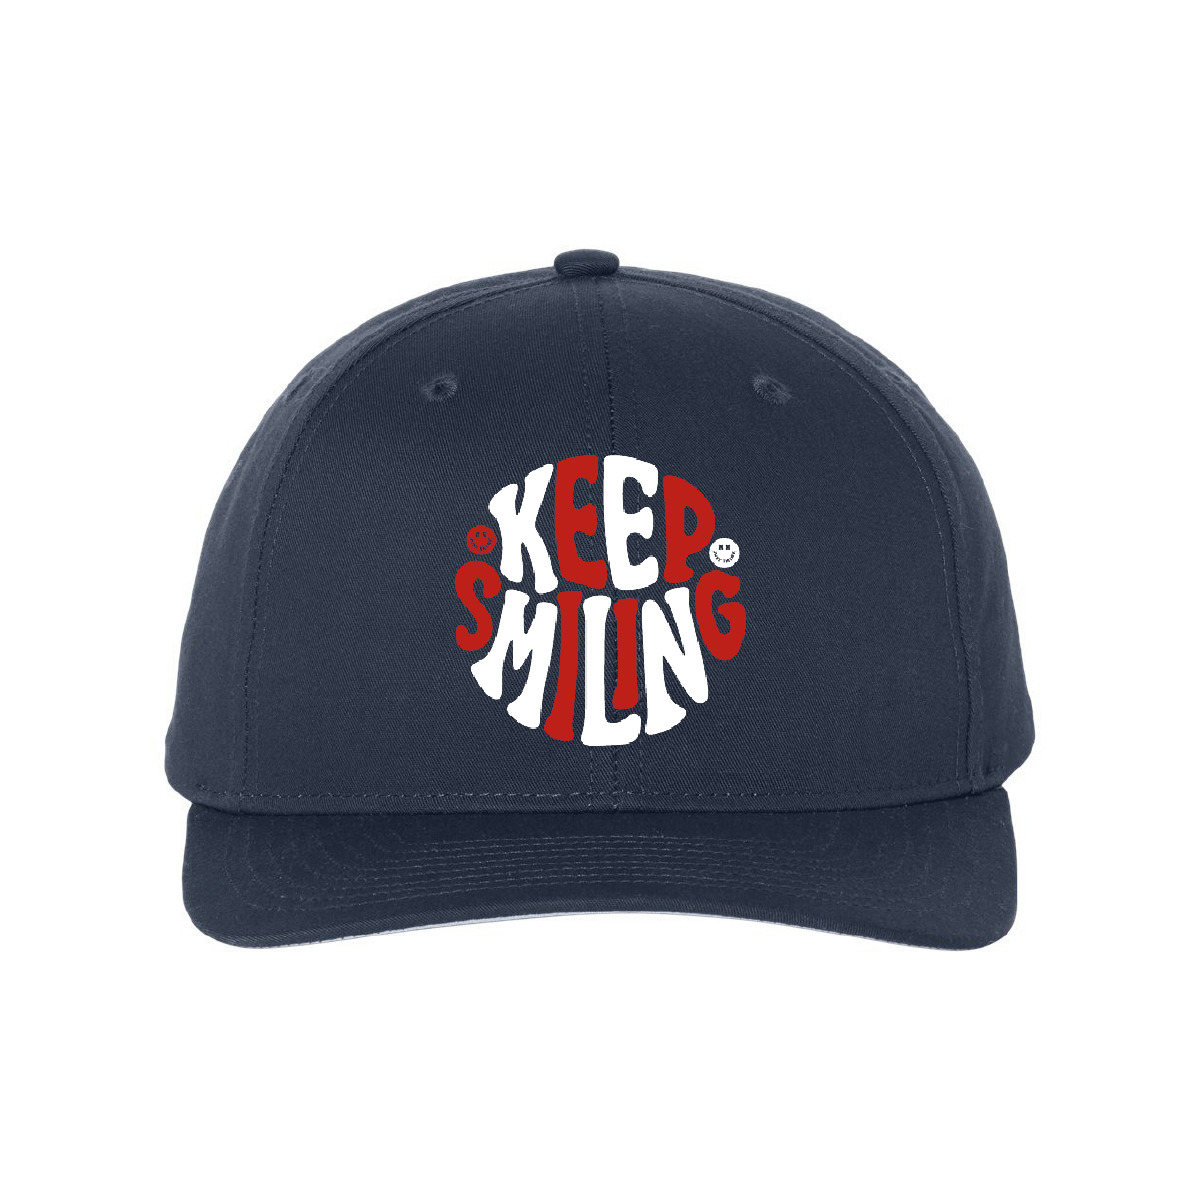 Keep Smiling Red White and Blue - Snapback